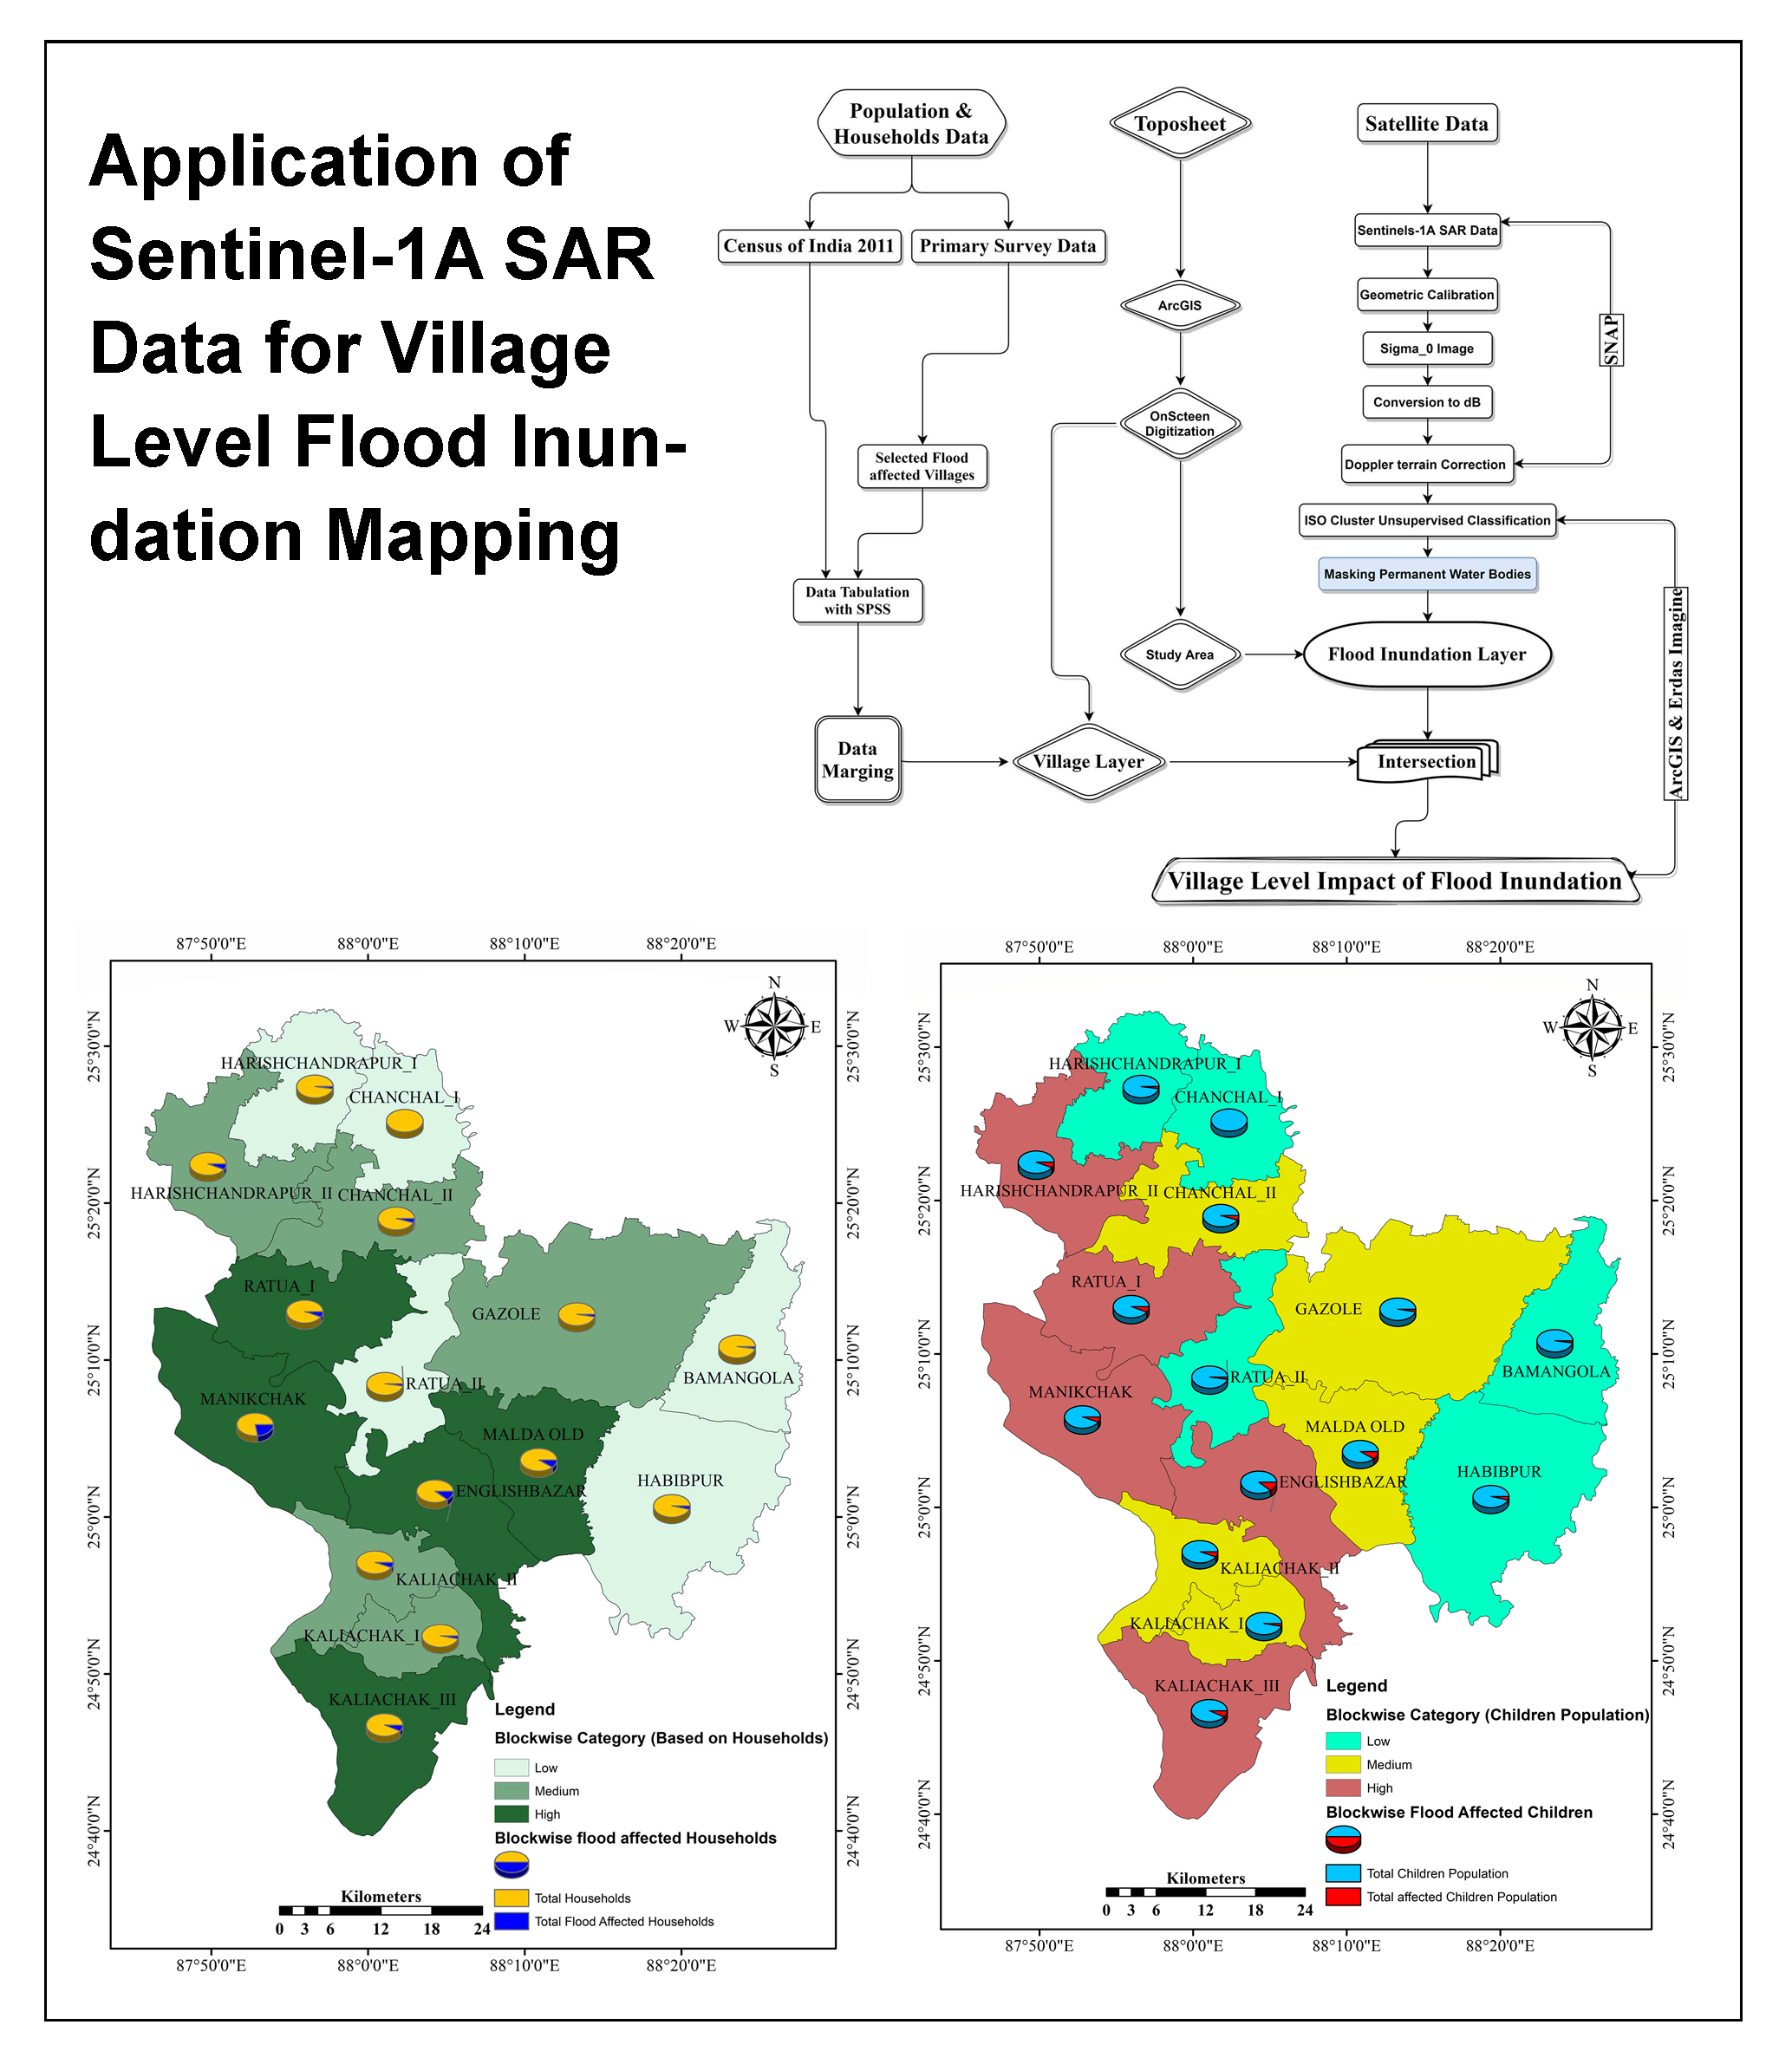 Application of Sentinel-1A SAR Data for Village Level Flood Inundation Mapping in Malda District, West Bengal, India